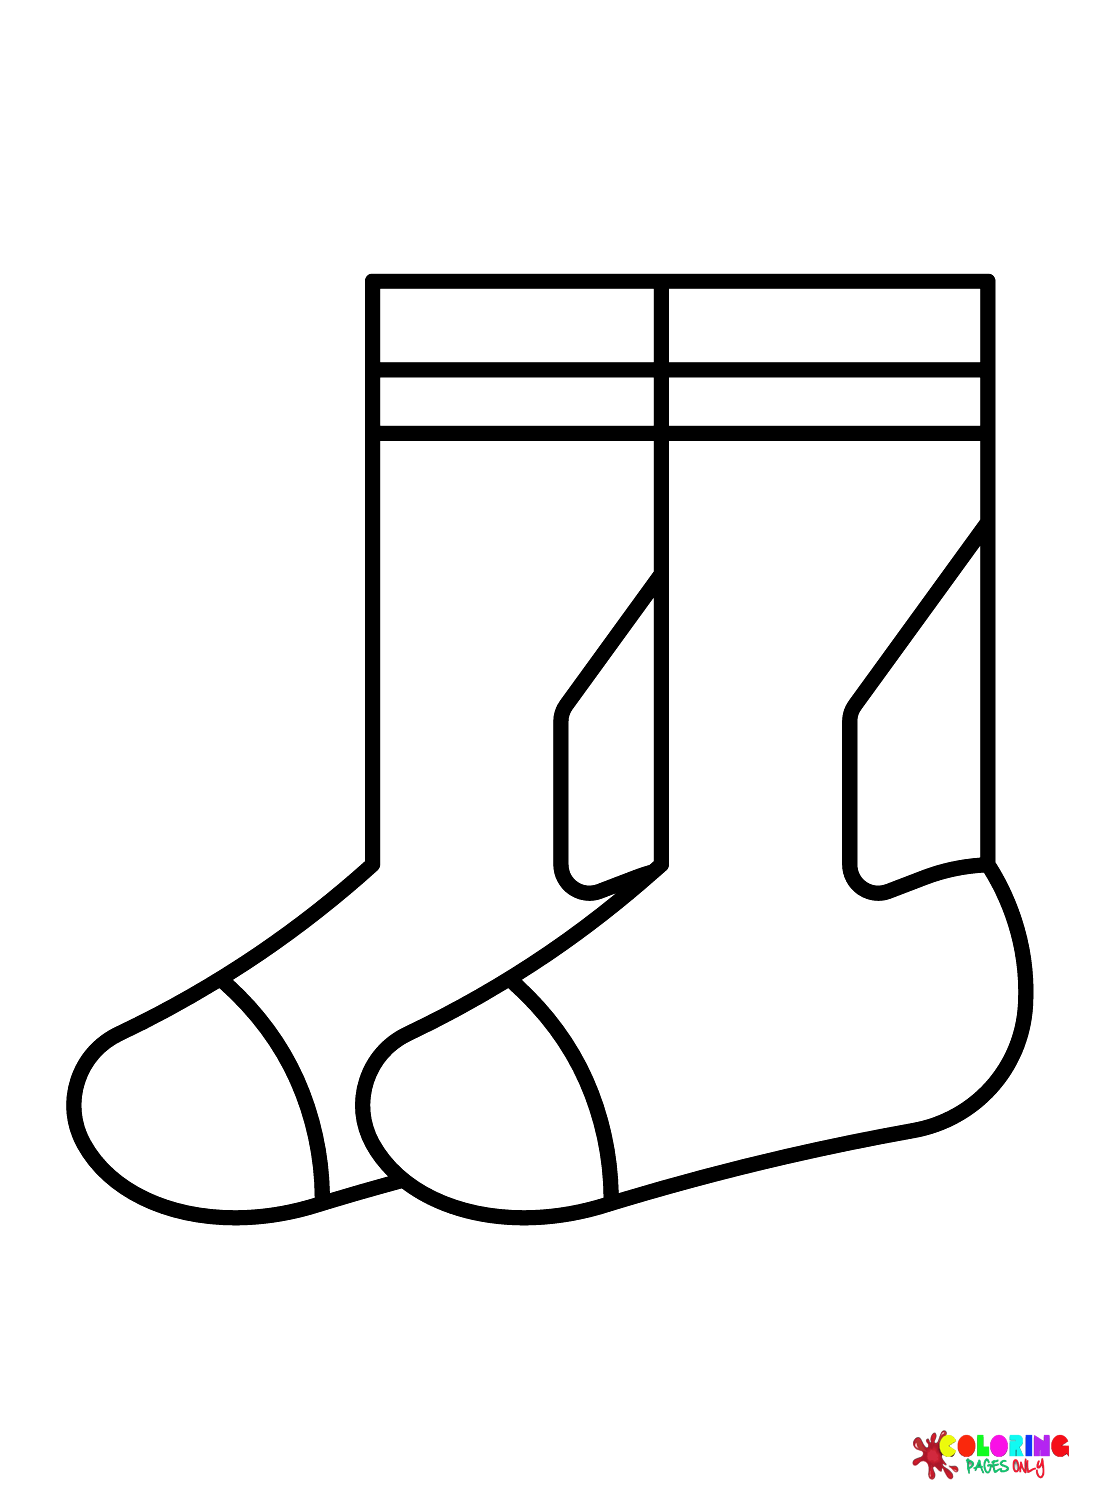 Socks color Sheets Coloring Pages - Free Printable Coloring Pages